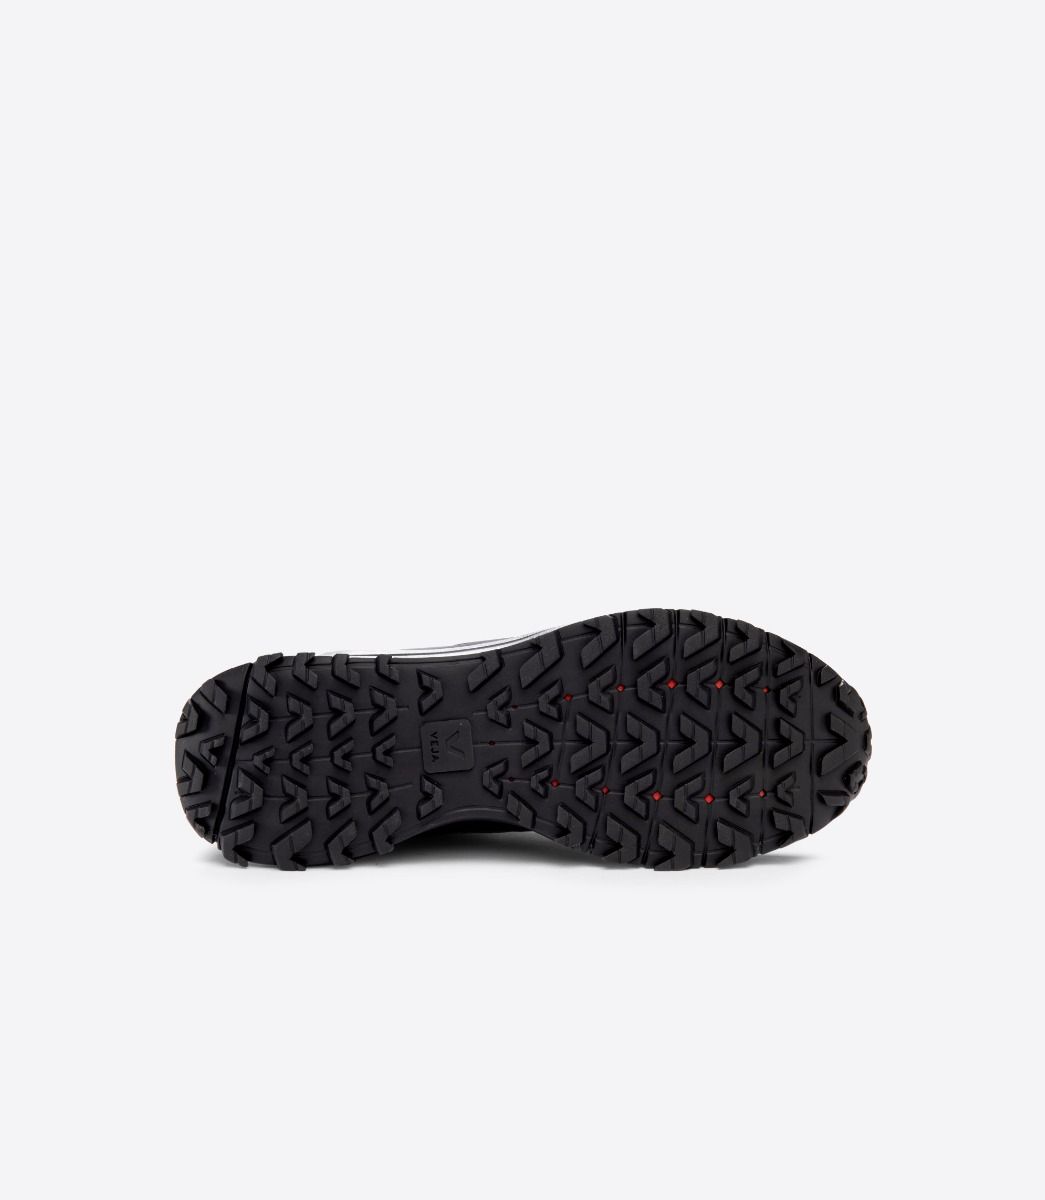 Bottom (outer sole) view of a pair of Men's Fitz Roy Trek shell trail shoes by VEJA in all black